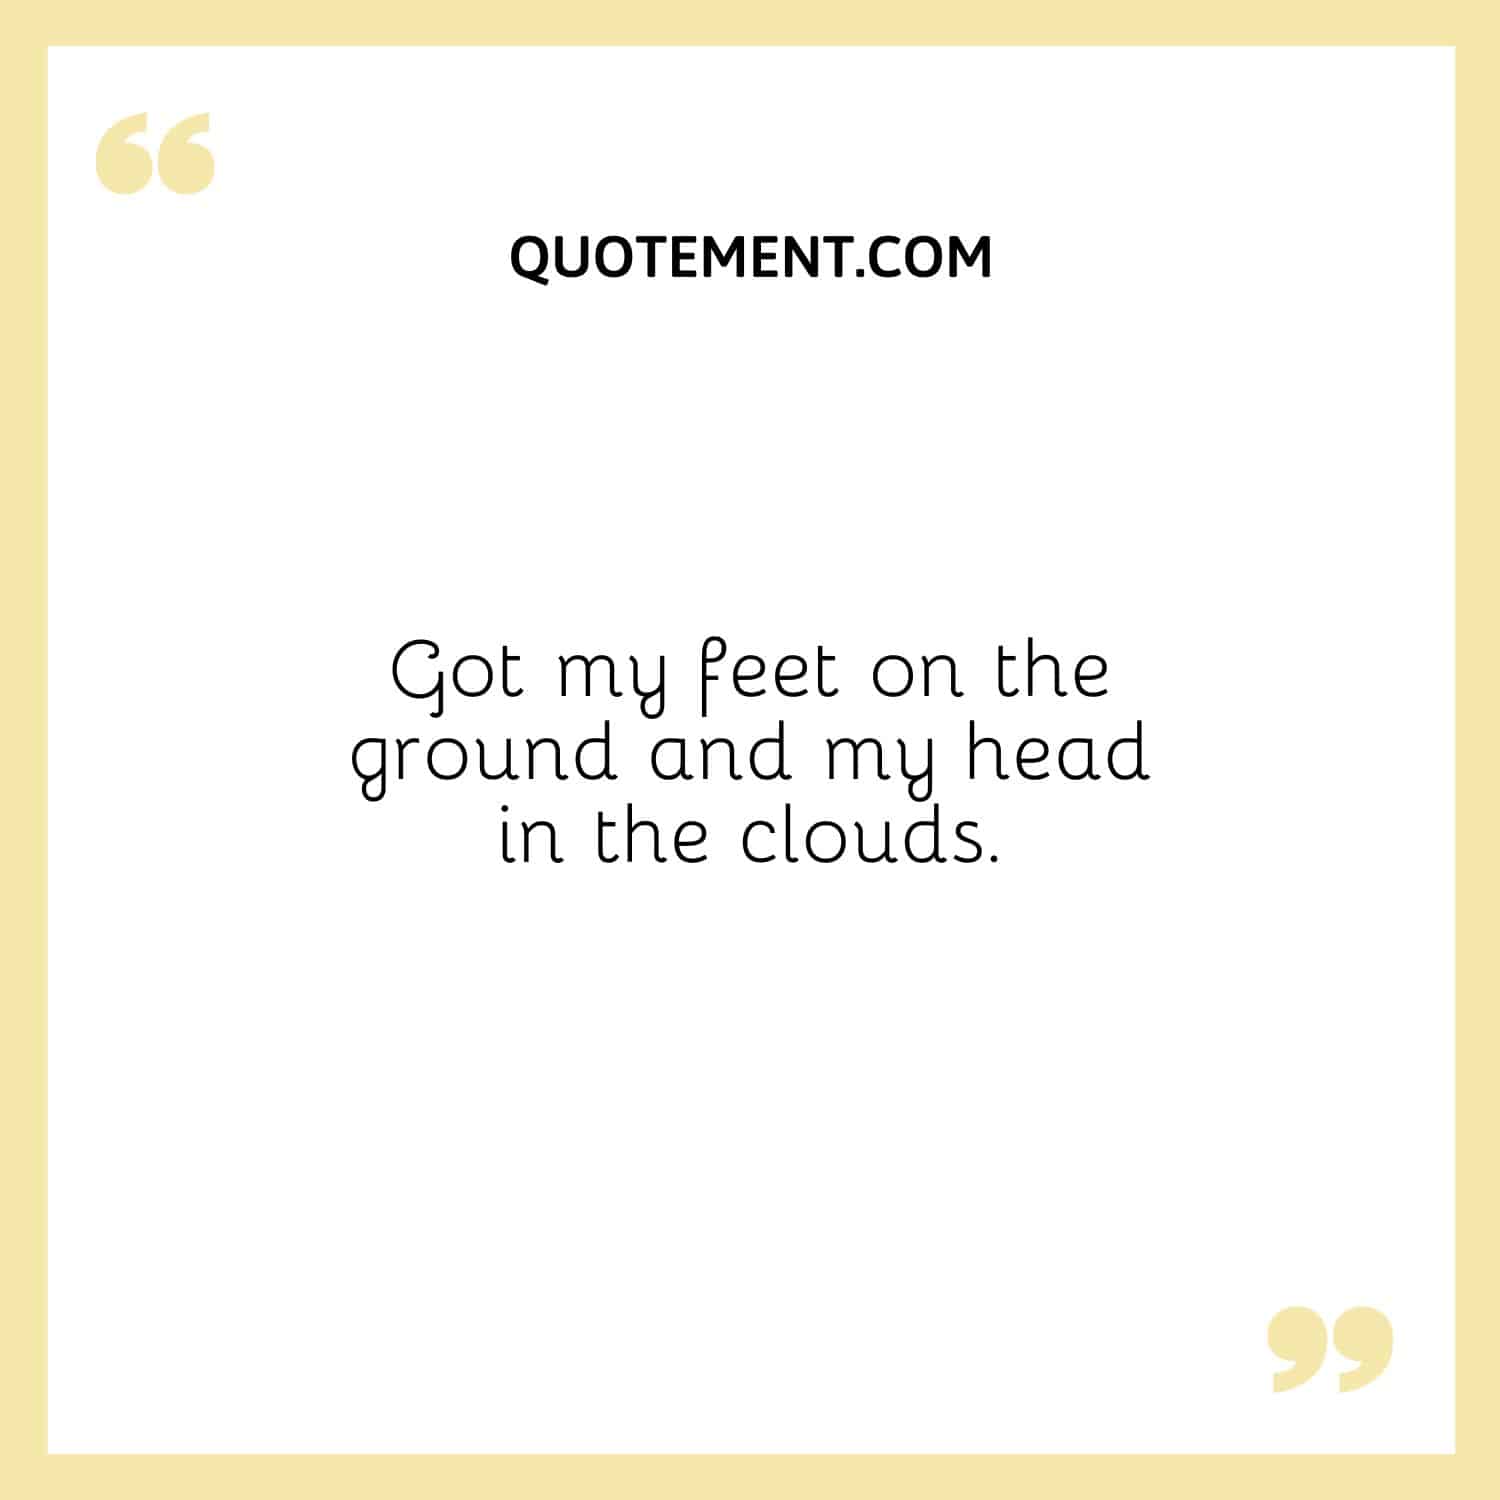 Got my feet on the ground and my head in the clouds.